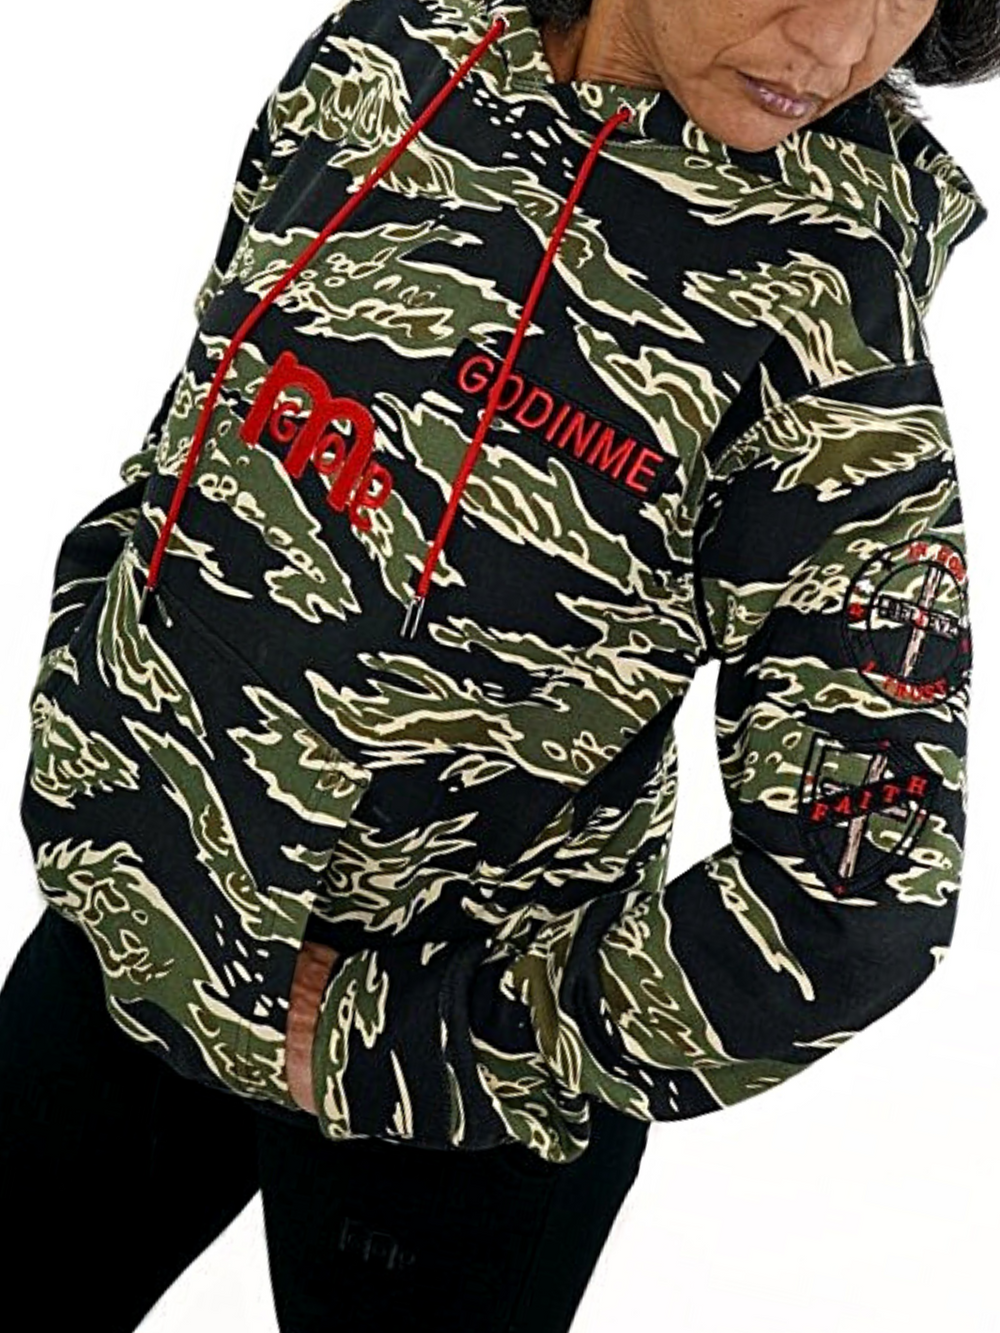 Righteousness hoodie, big bold red logo mid chest,  tiger camouflage fabric design, embroidered patches on sleeves  